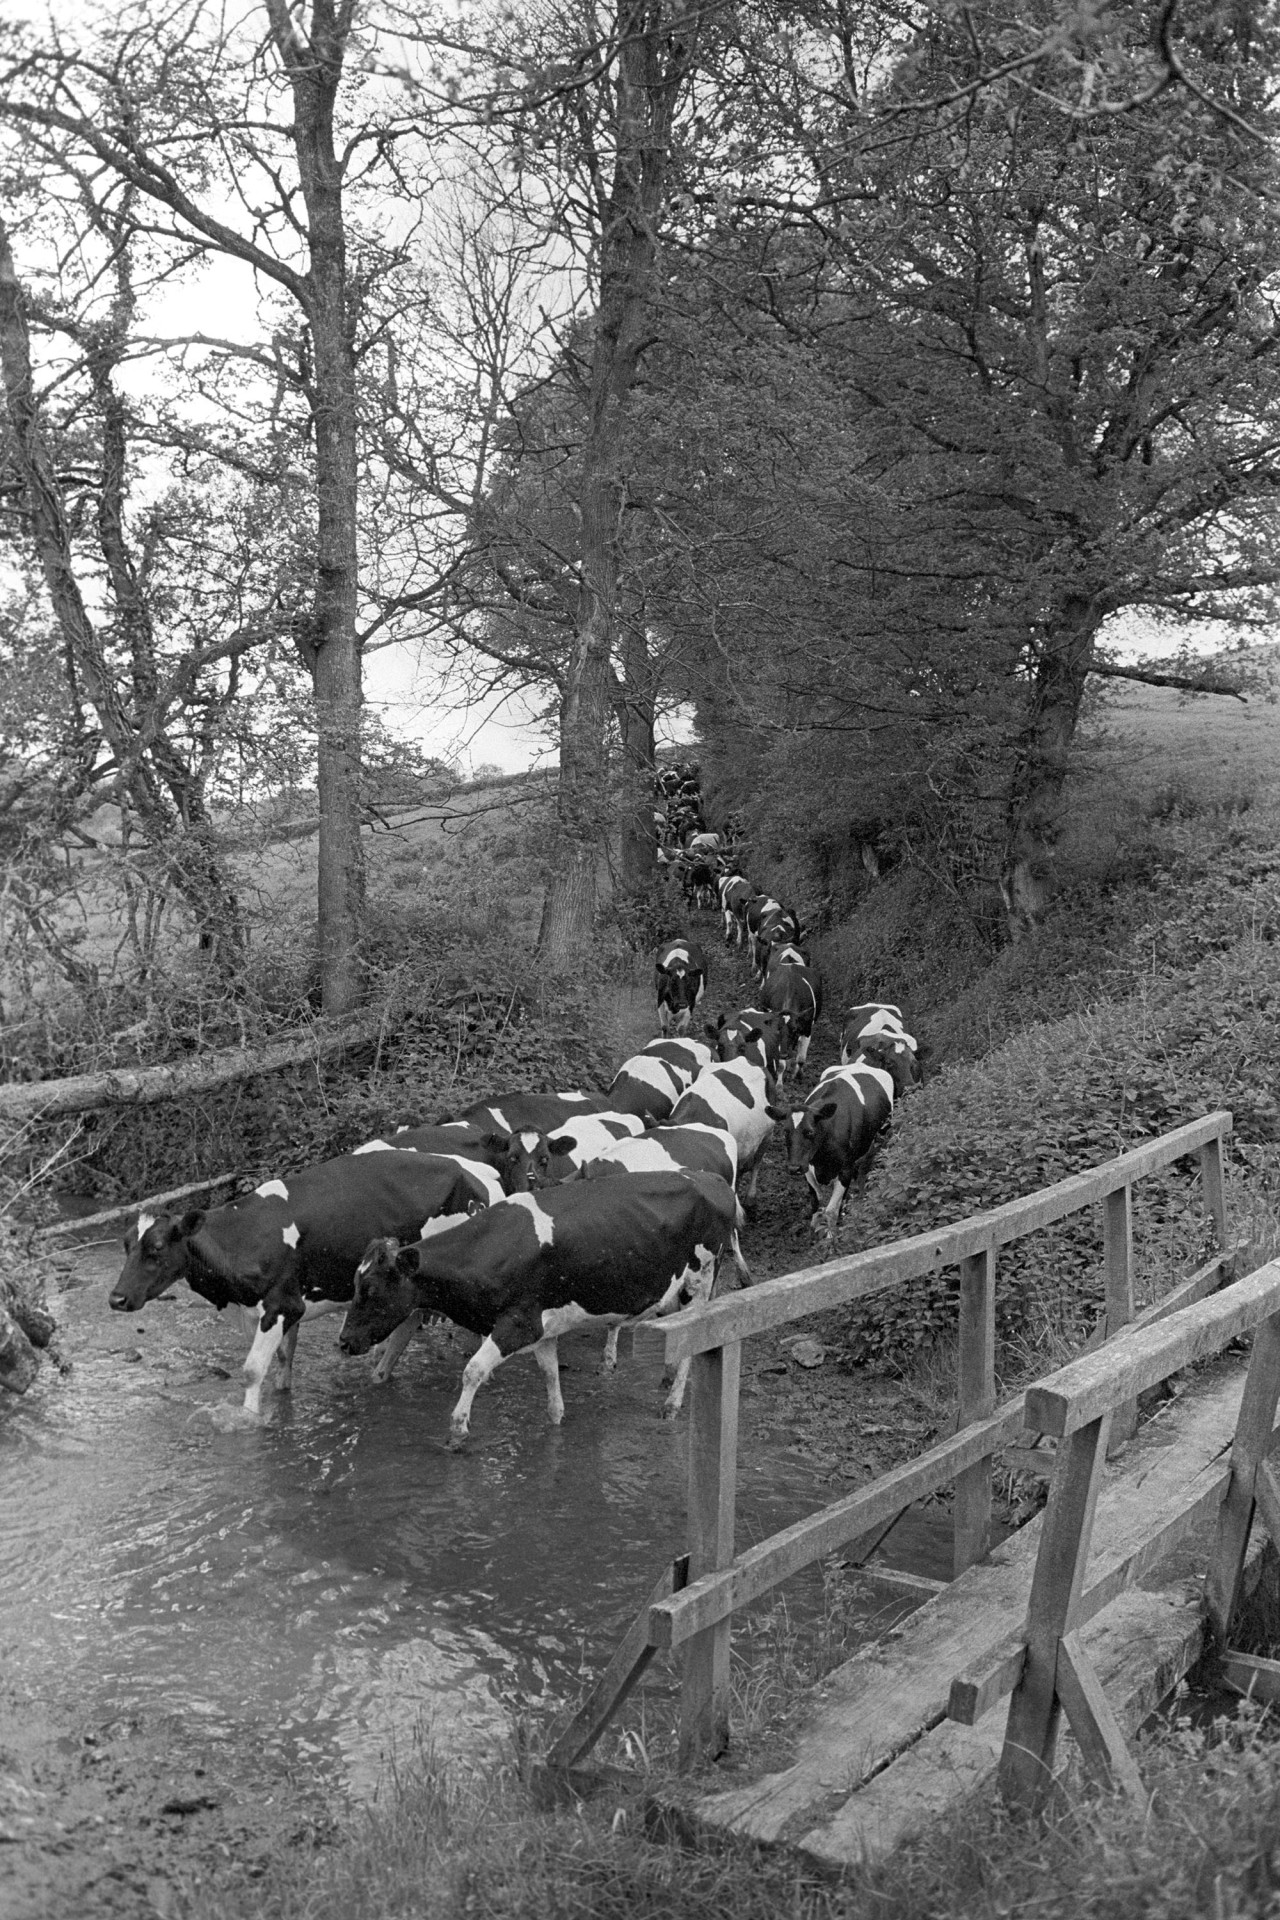 Cows going to be milked past elm trees and footbridge over stream. 
[Cows being herded along a lane past elm trees and through a stream to be milked at Cleave Farm, Dolton. They are passing a wooden footbridge over the stream.]